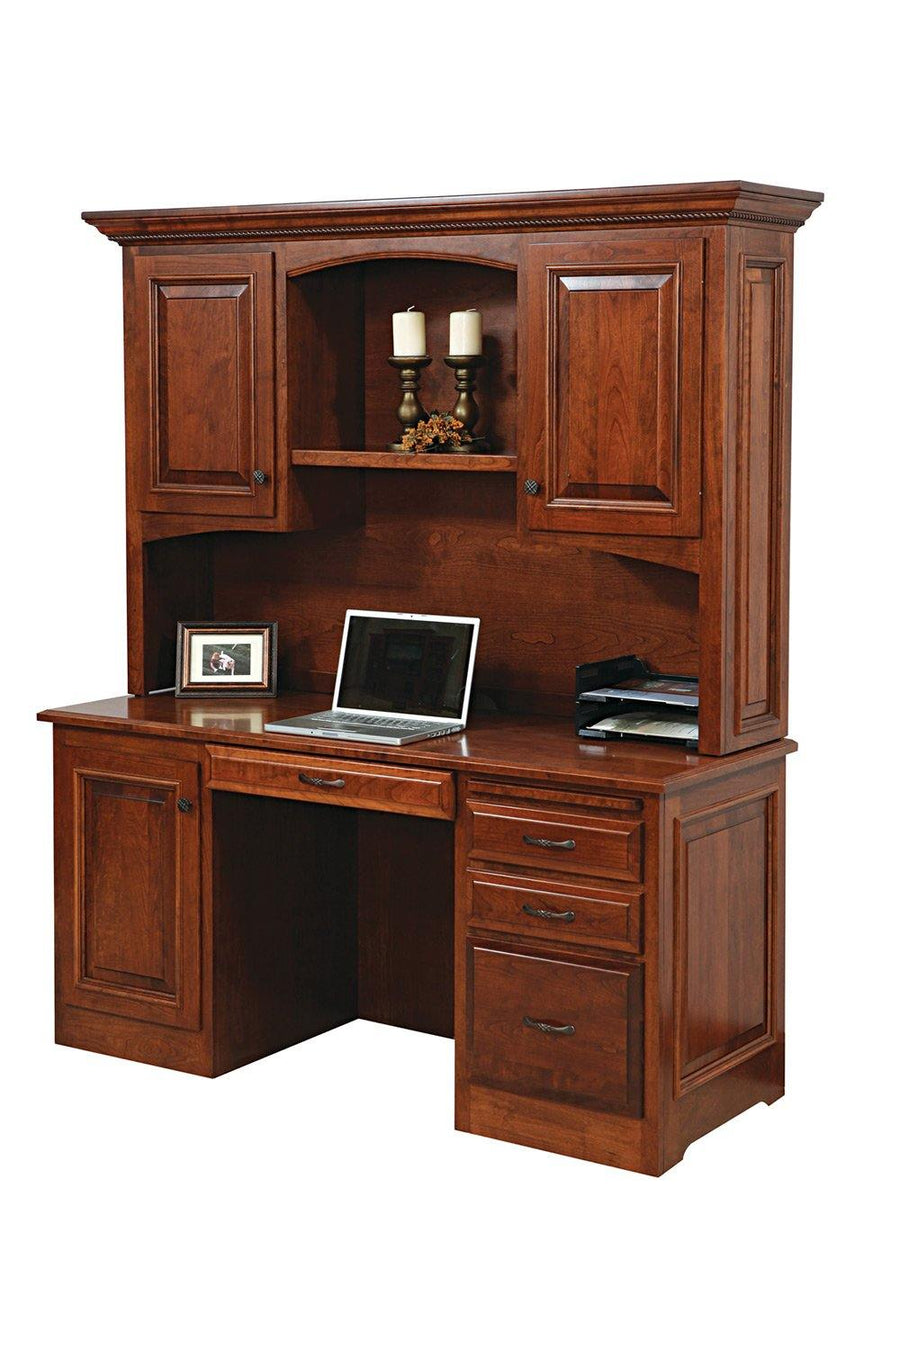 Liberty Amish Desk with Hutch Top - Foothills Amish Furniture